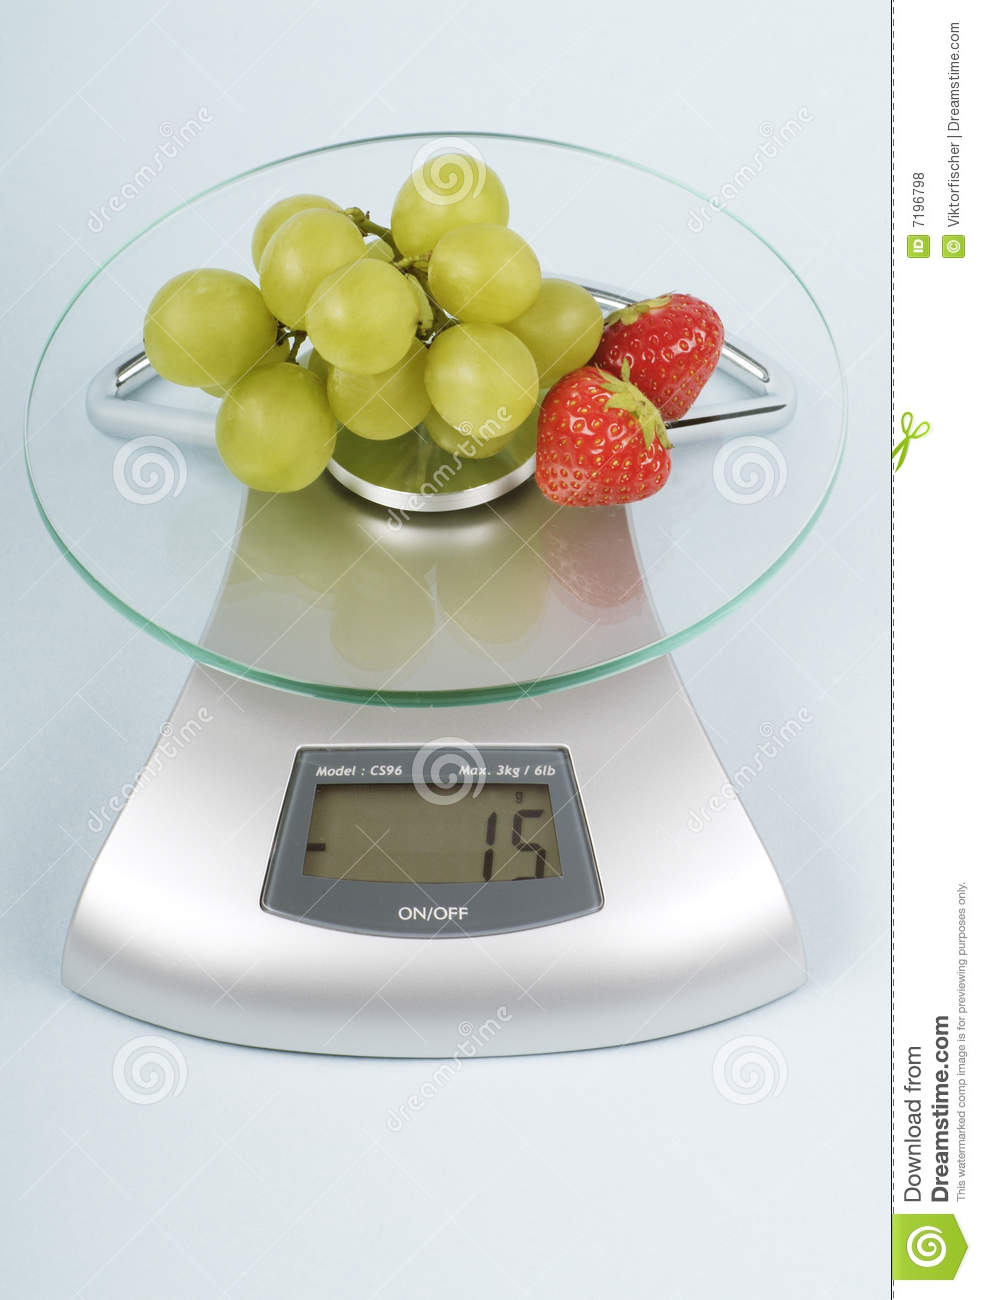 Fruit On A Kitchen Scale Royalty Free Stock Photos   Image  7196798